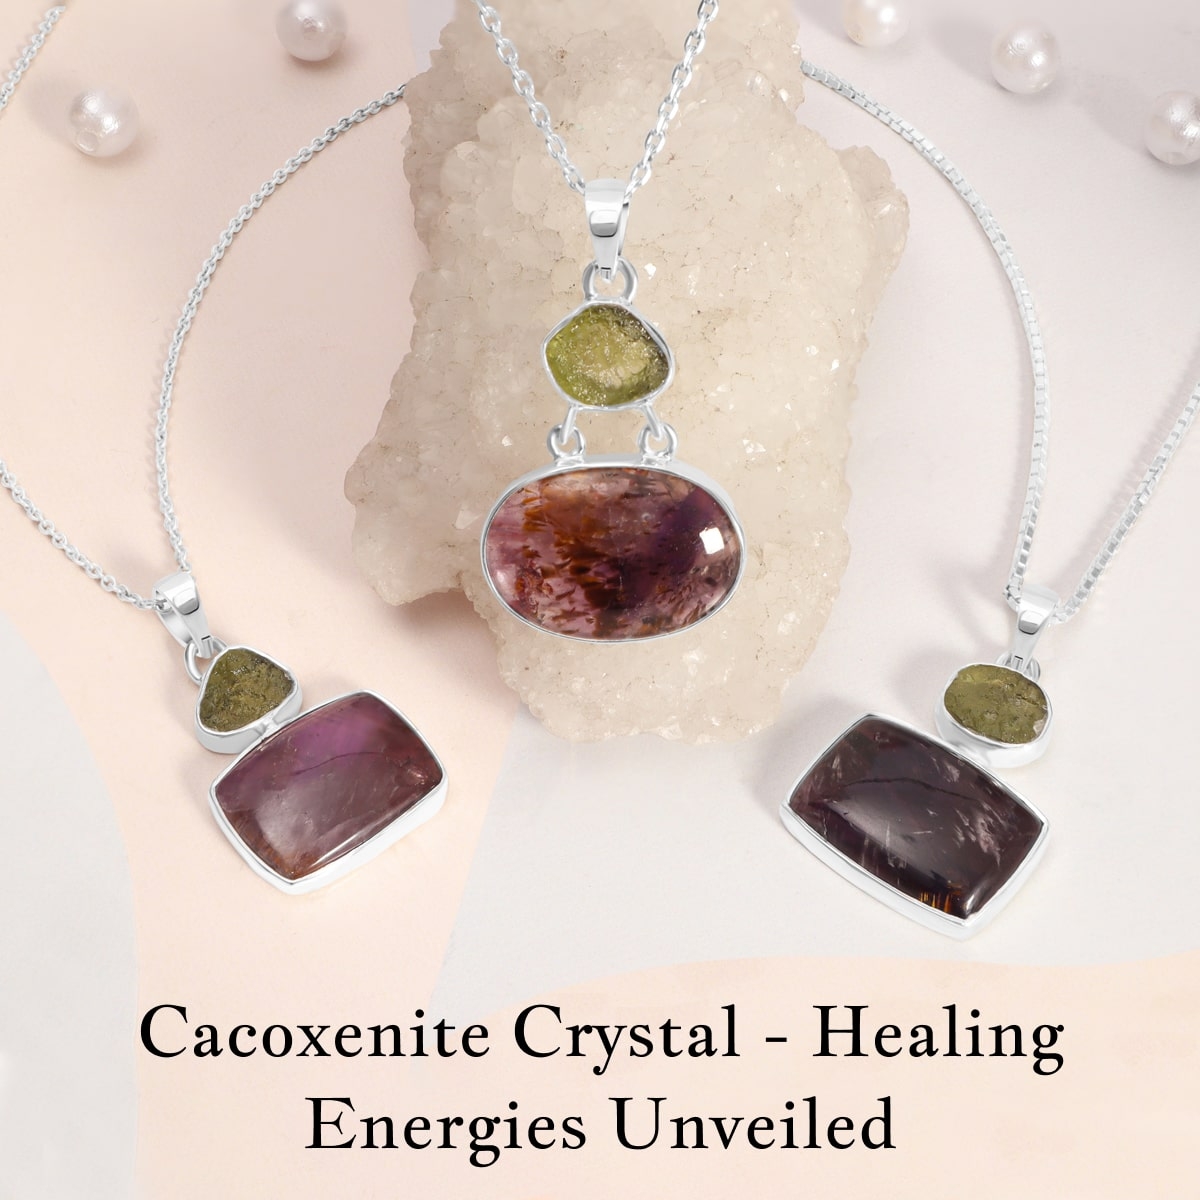 Healing Properties of Cacoxenite Crystal